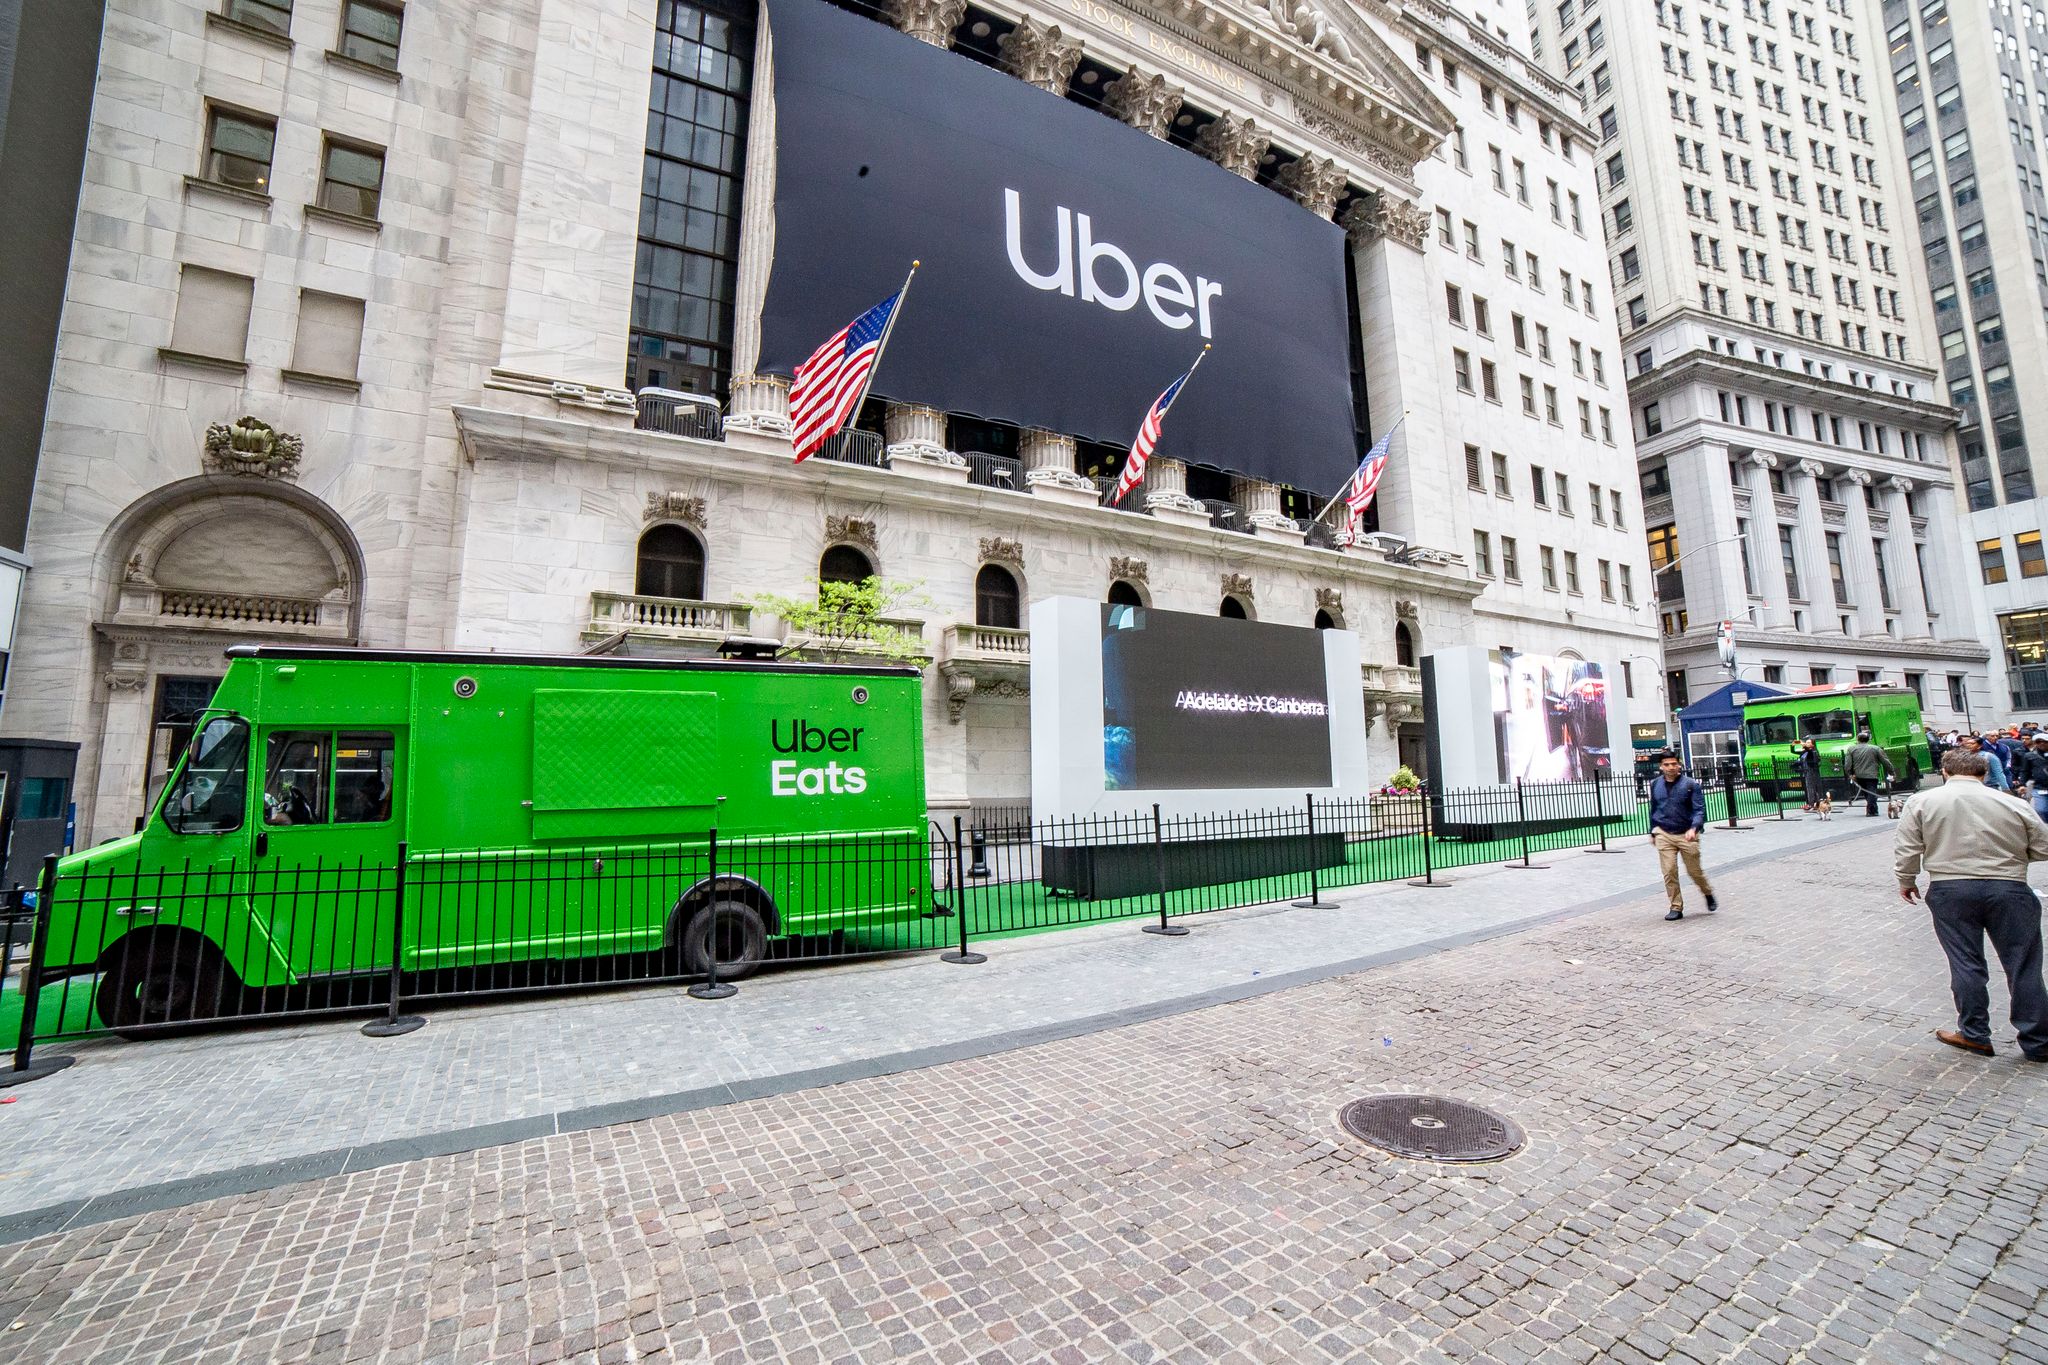 Uber Eats Branded Food Truck At The New York Stock Exchange